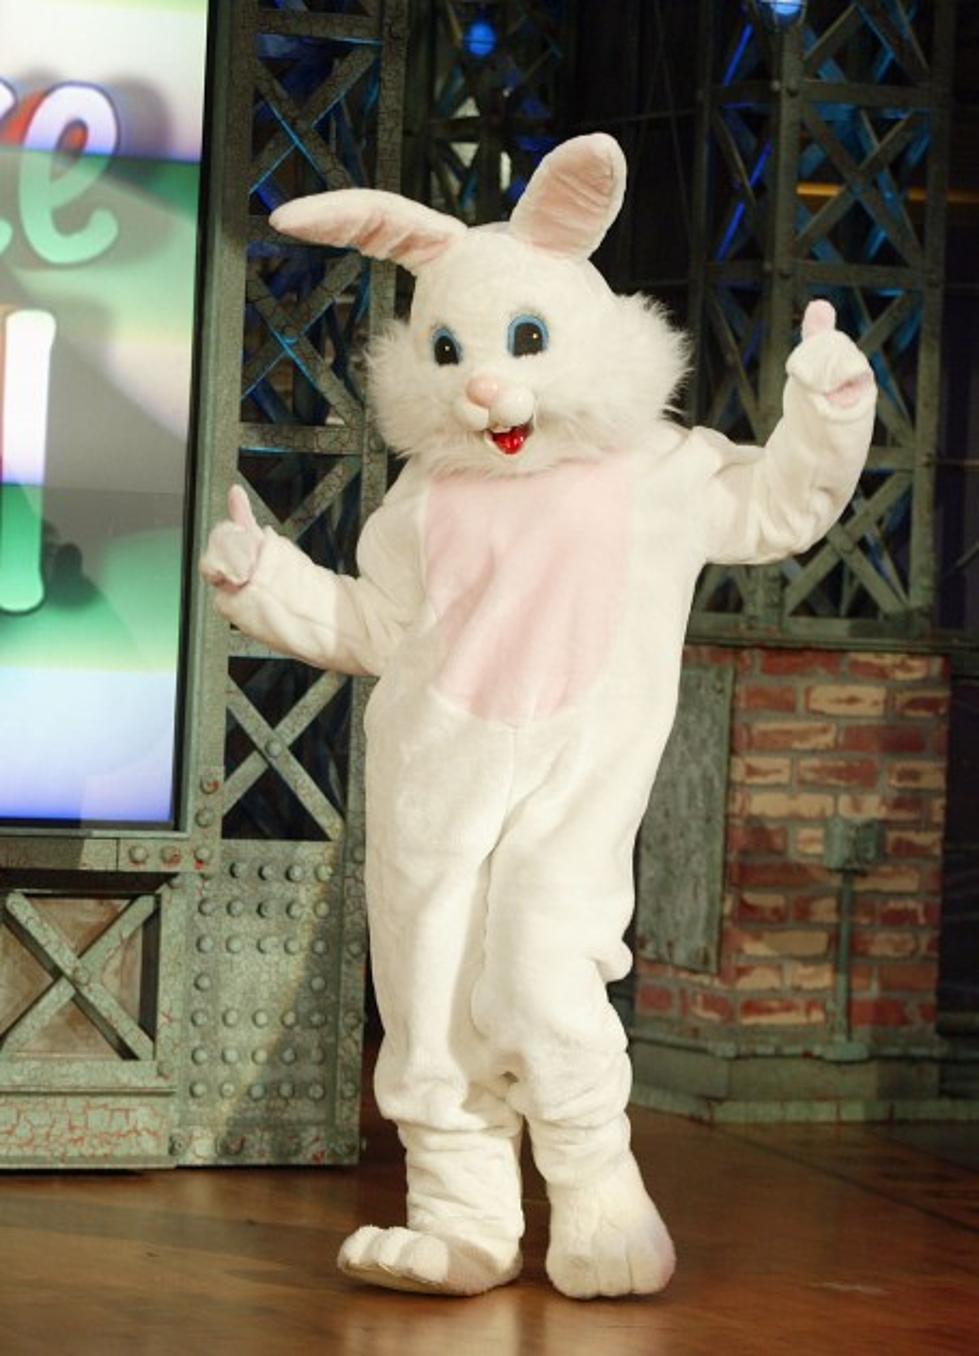 Hippity, Hoppity &#8212; The Easter Bunny&#8217;s on His Way! Here&#8217;s Where You Can Find Him in Buffalo